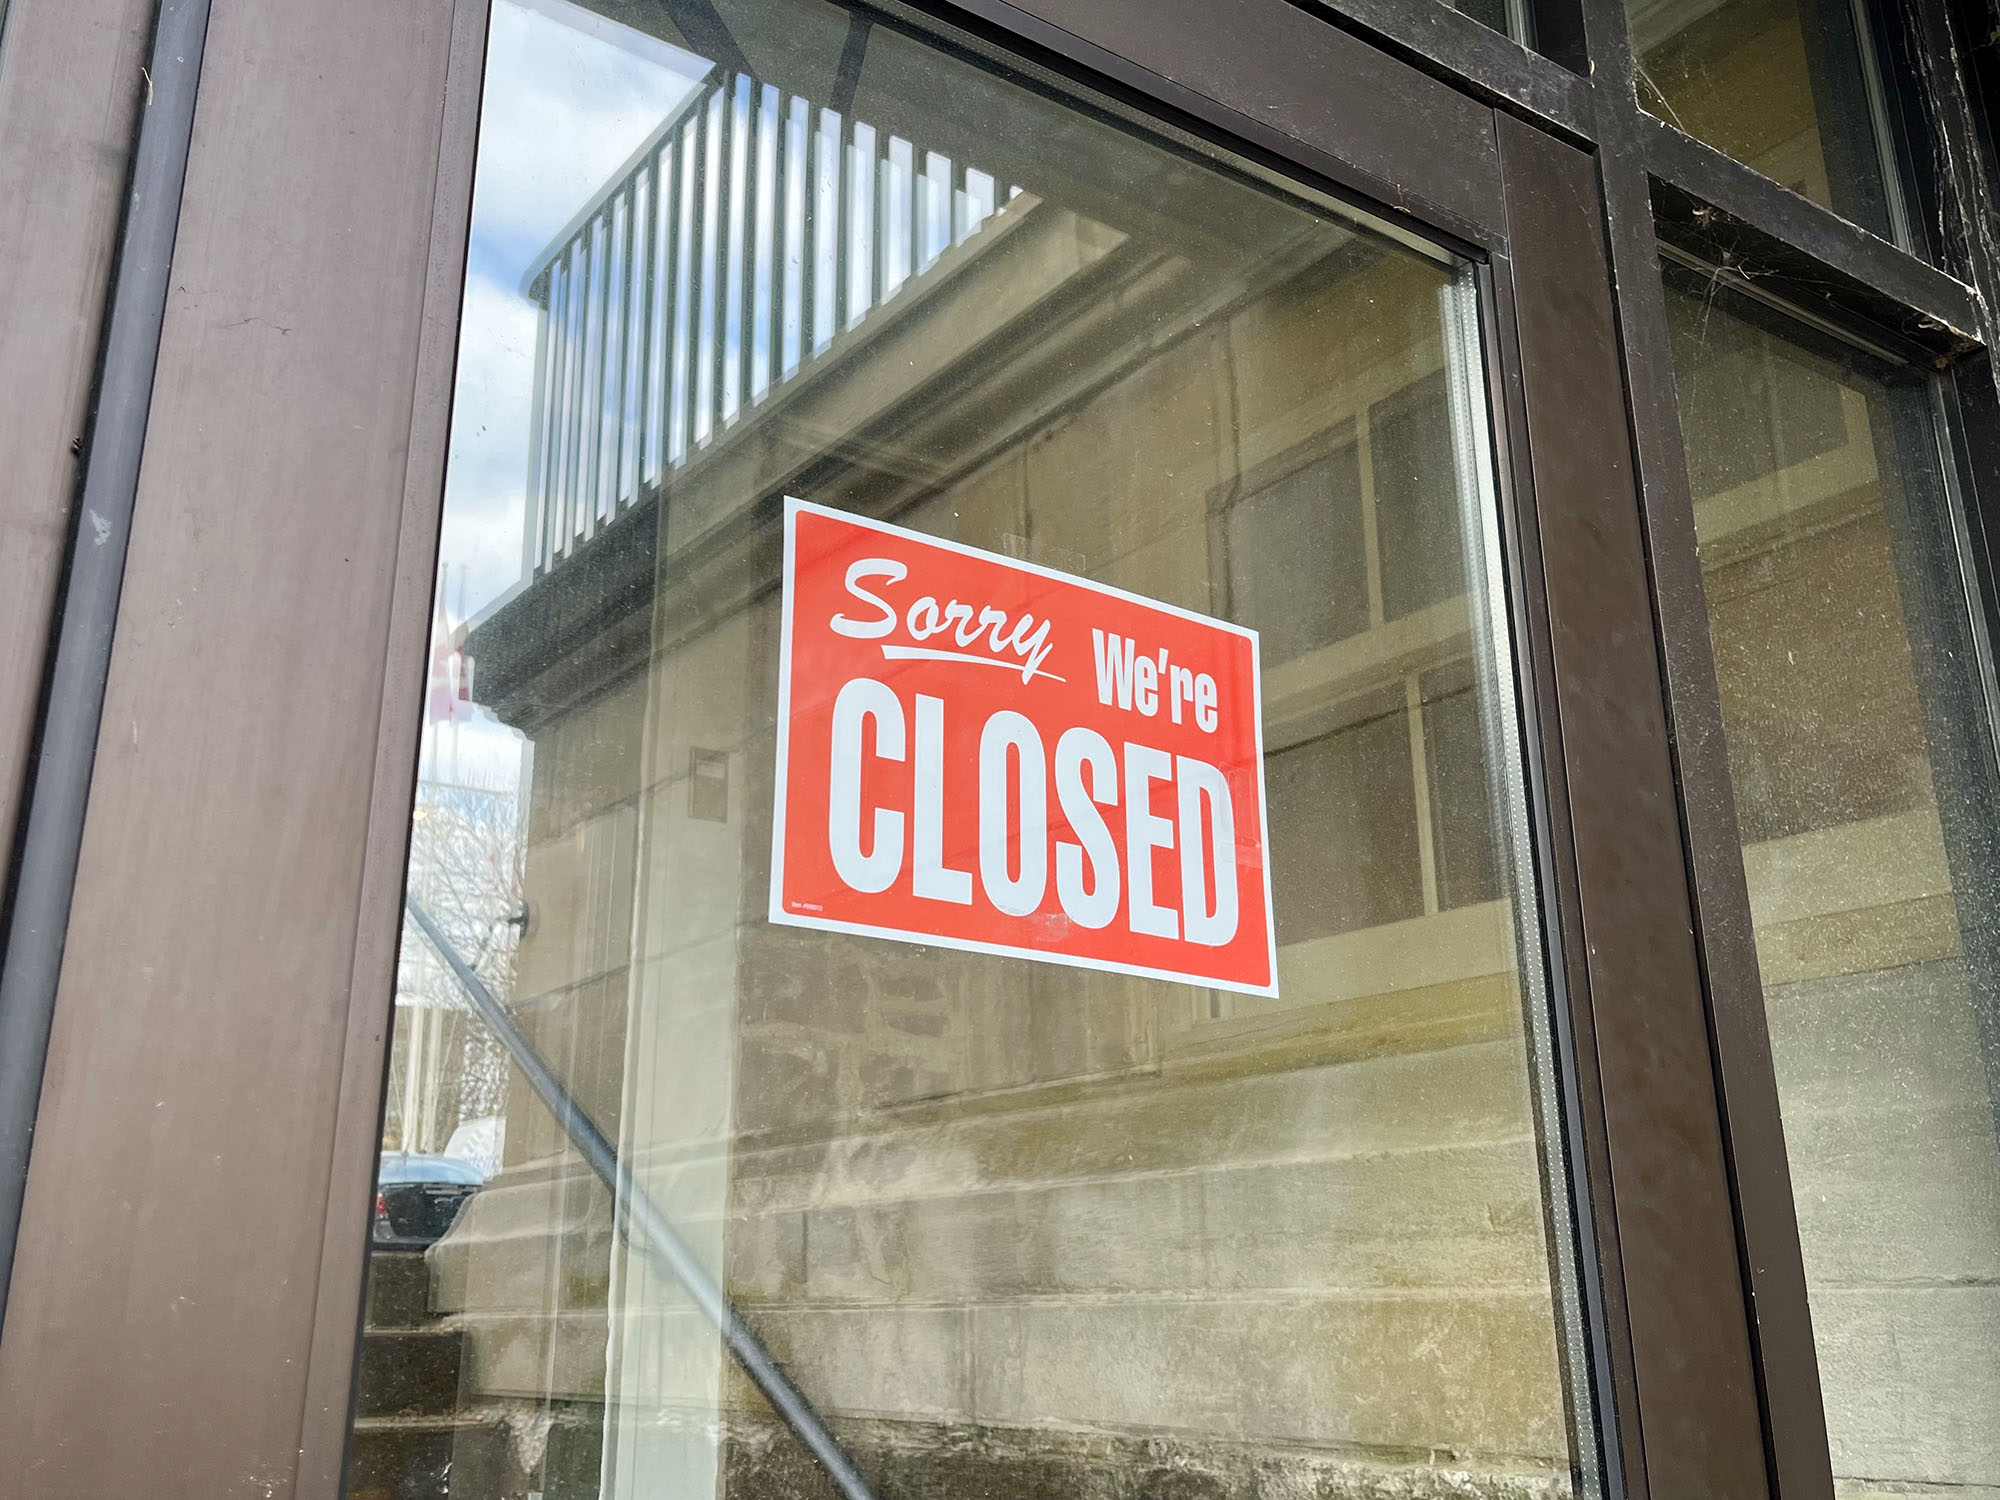 A "Sorry, we're closed sign" is seen on a door.